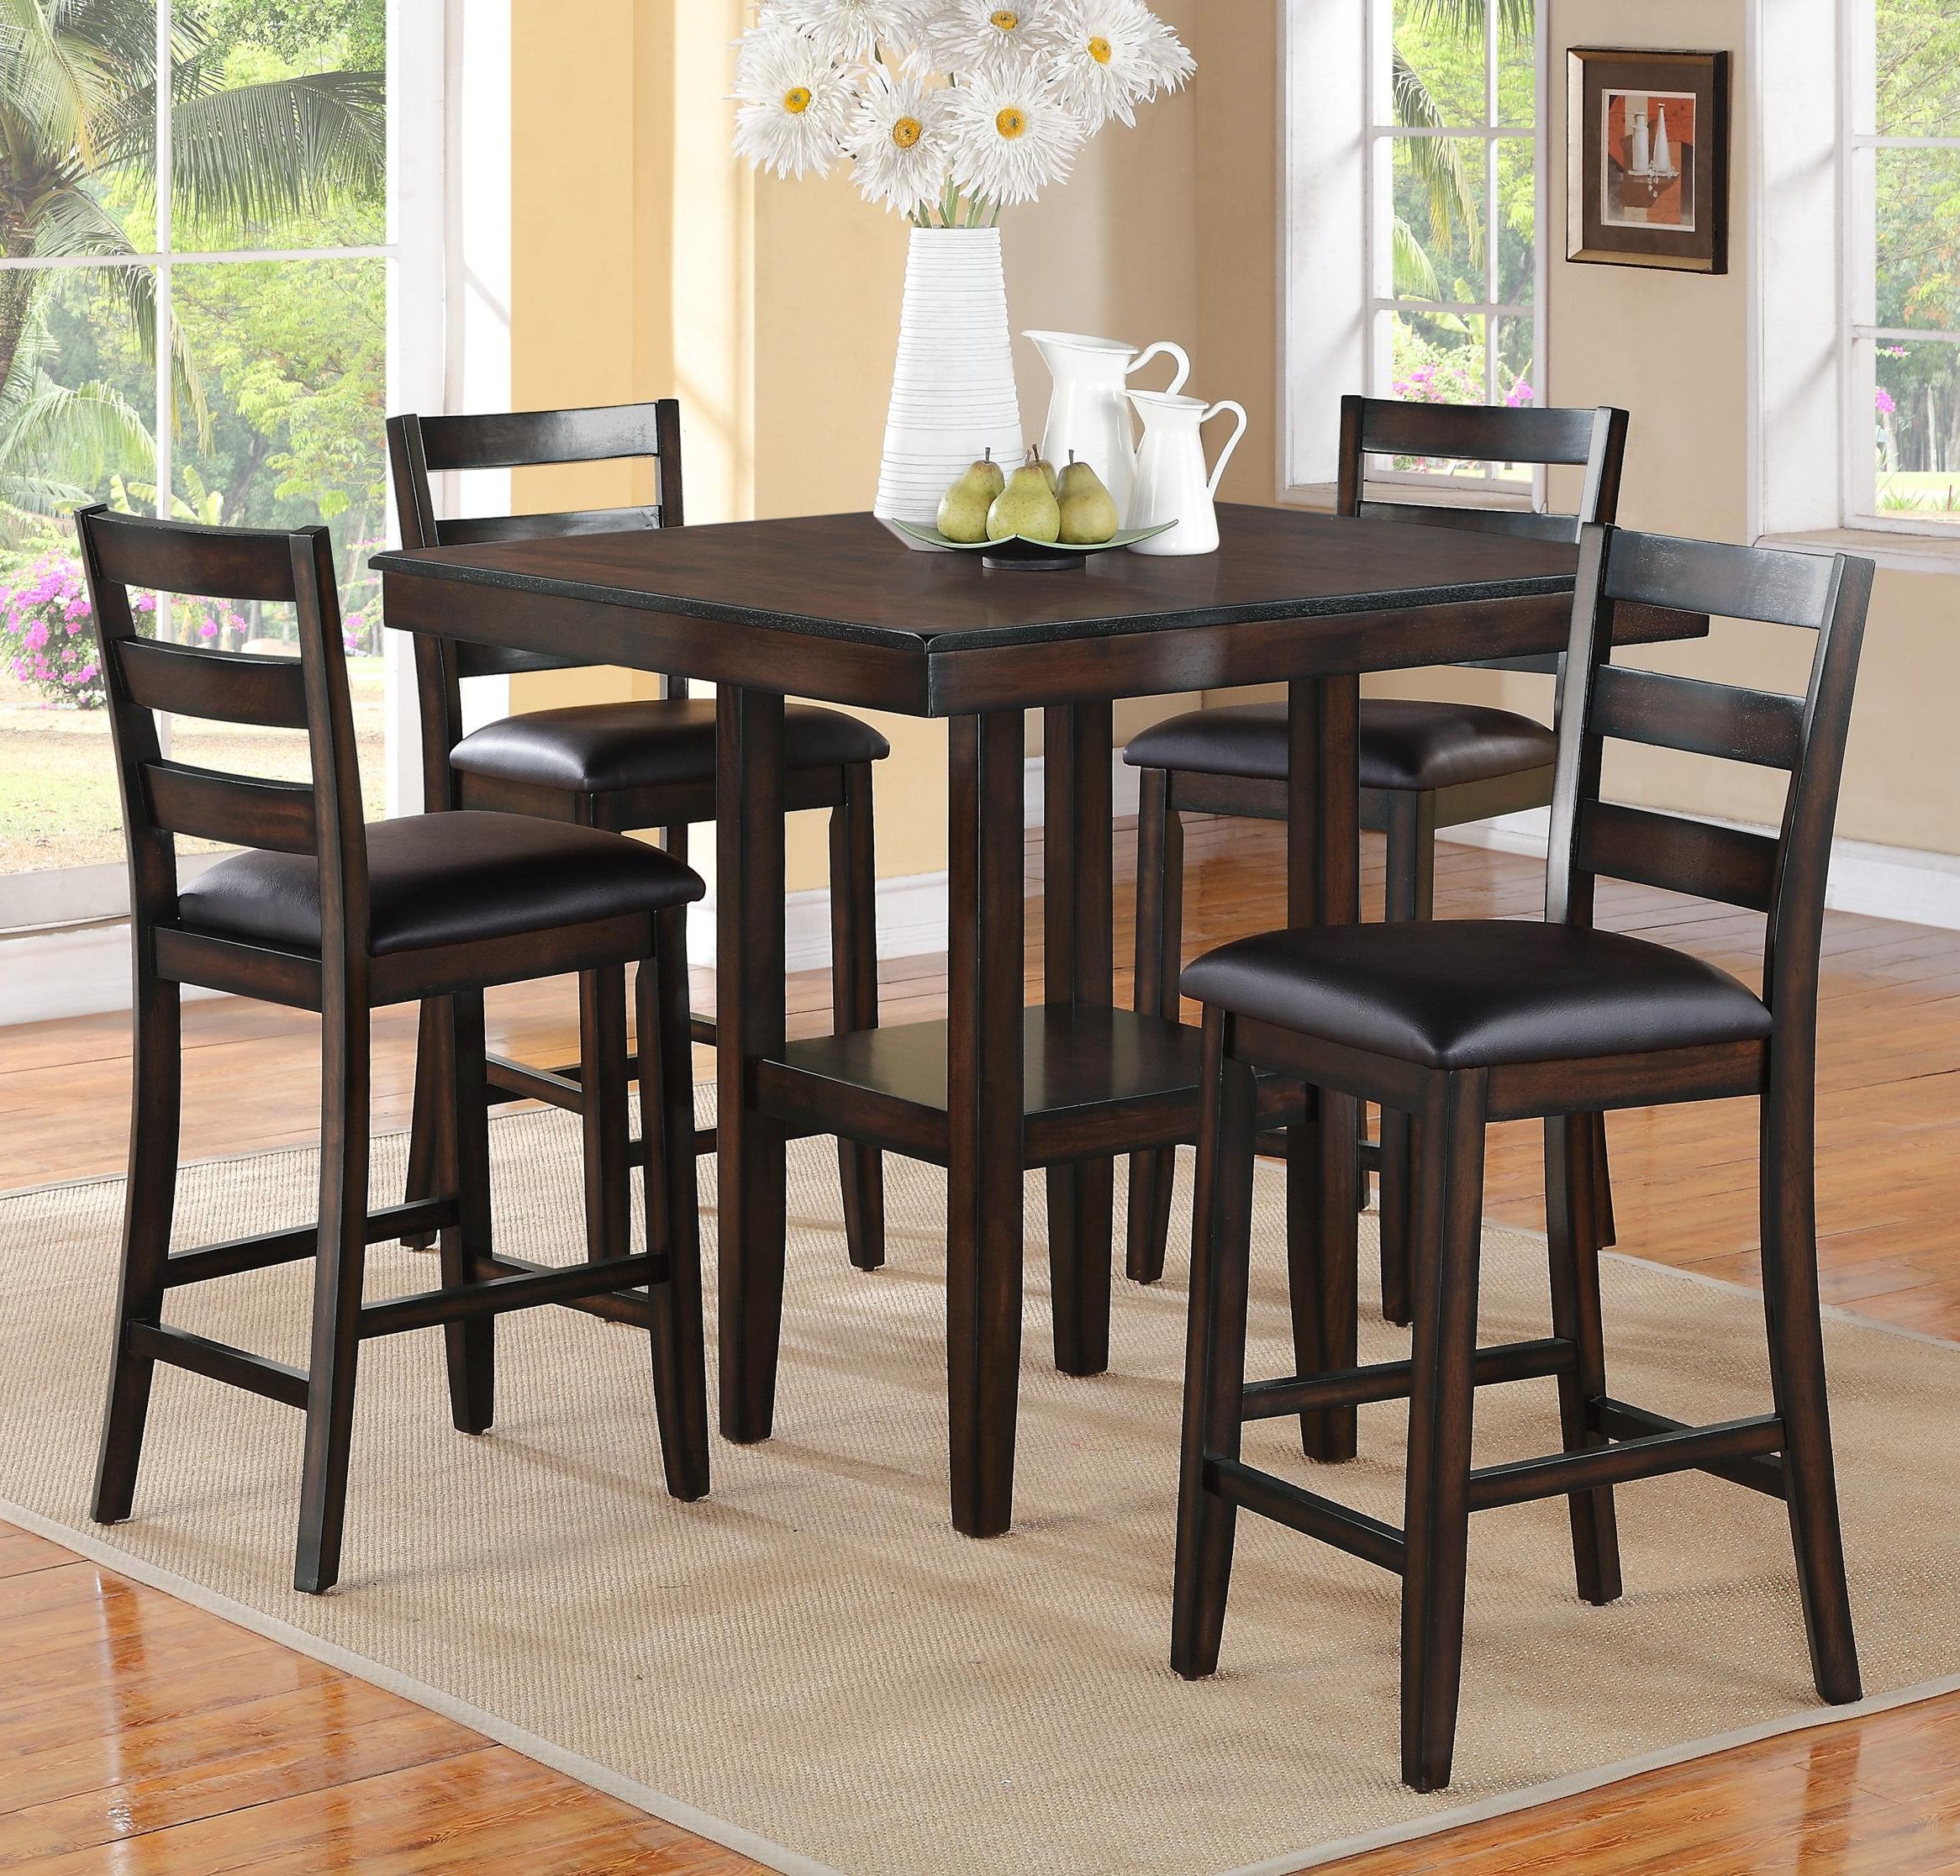 Most Recently Released 5 Piece Cafe Dining Sets Pertaining To Crown Mark Tahoe 5 Piece Counter Height Table And Chairs Set (View 5 of 15)